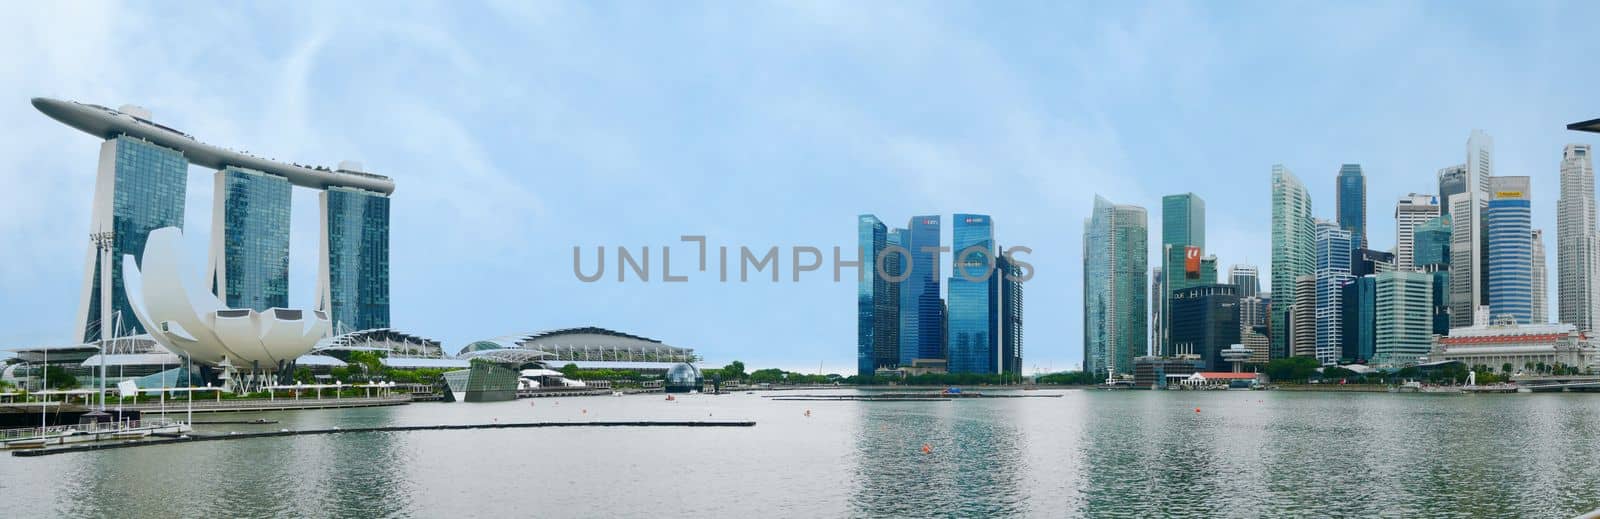 Singapore, marina bay 1 june 2022. Singapore Marina Bay Sands, and buildings  by towfiq007